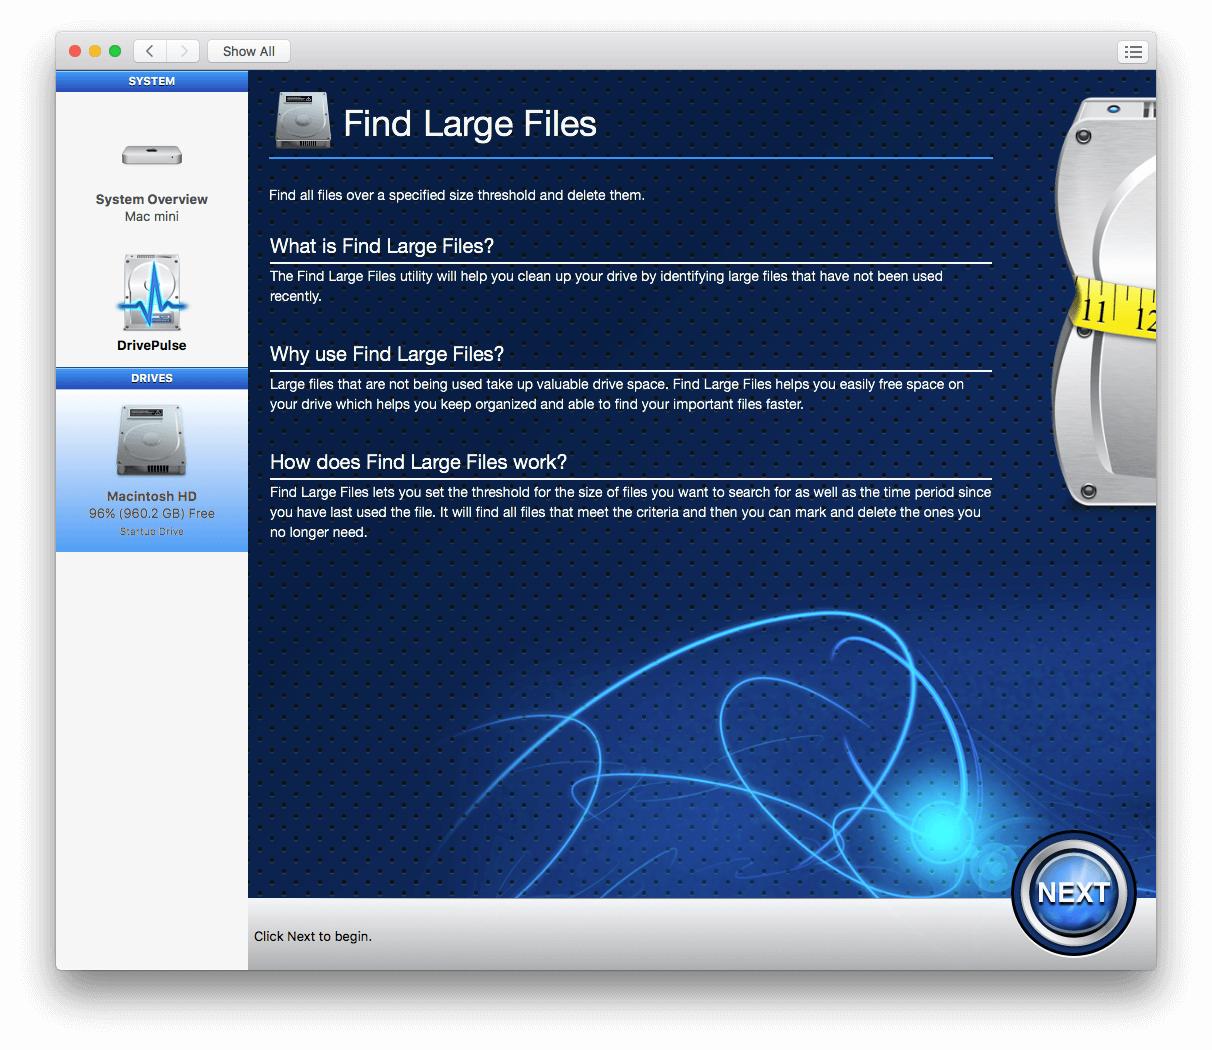 Find Large Files Utility info screen within Drive Genius.